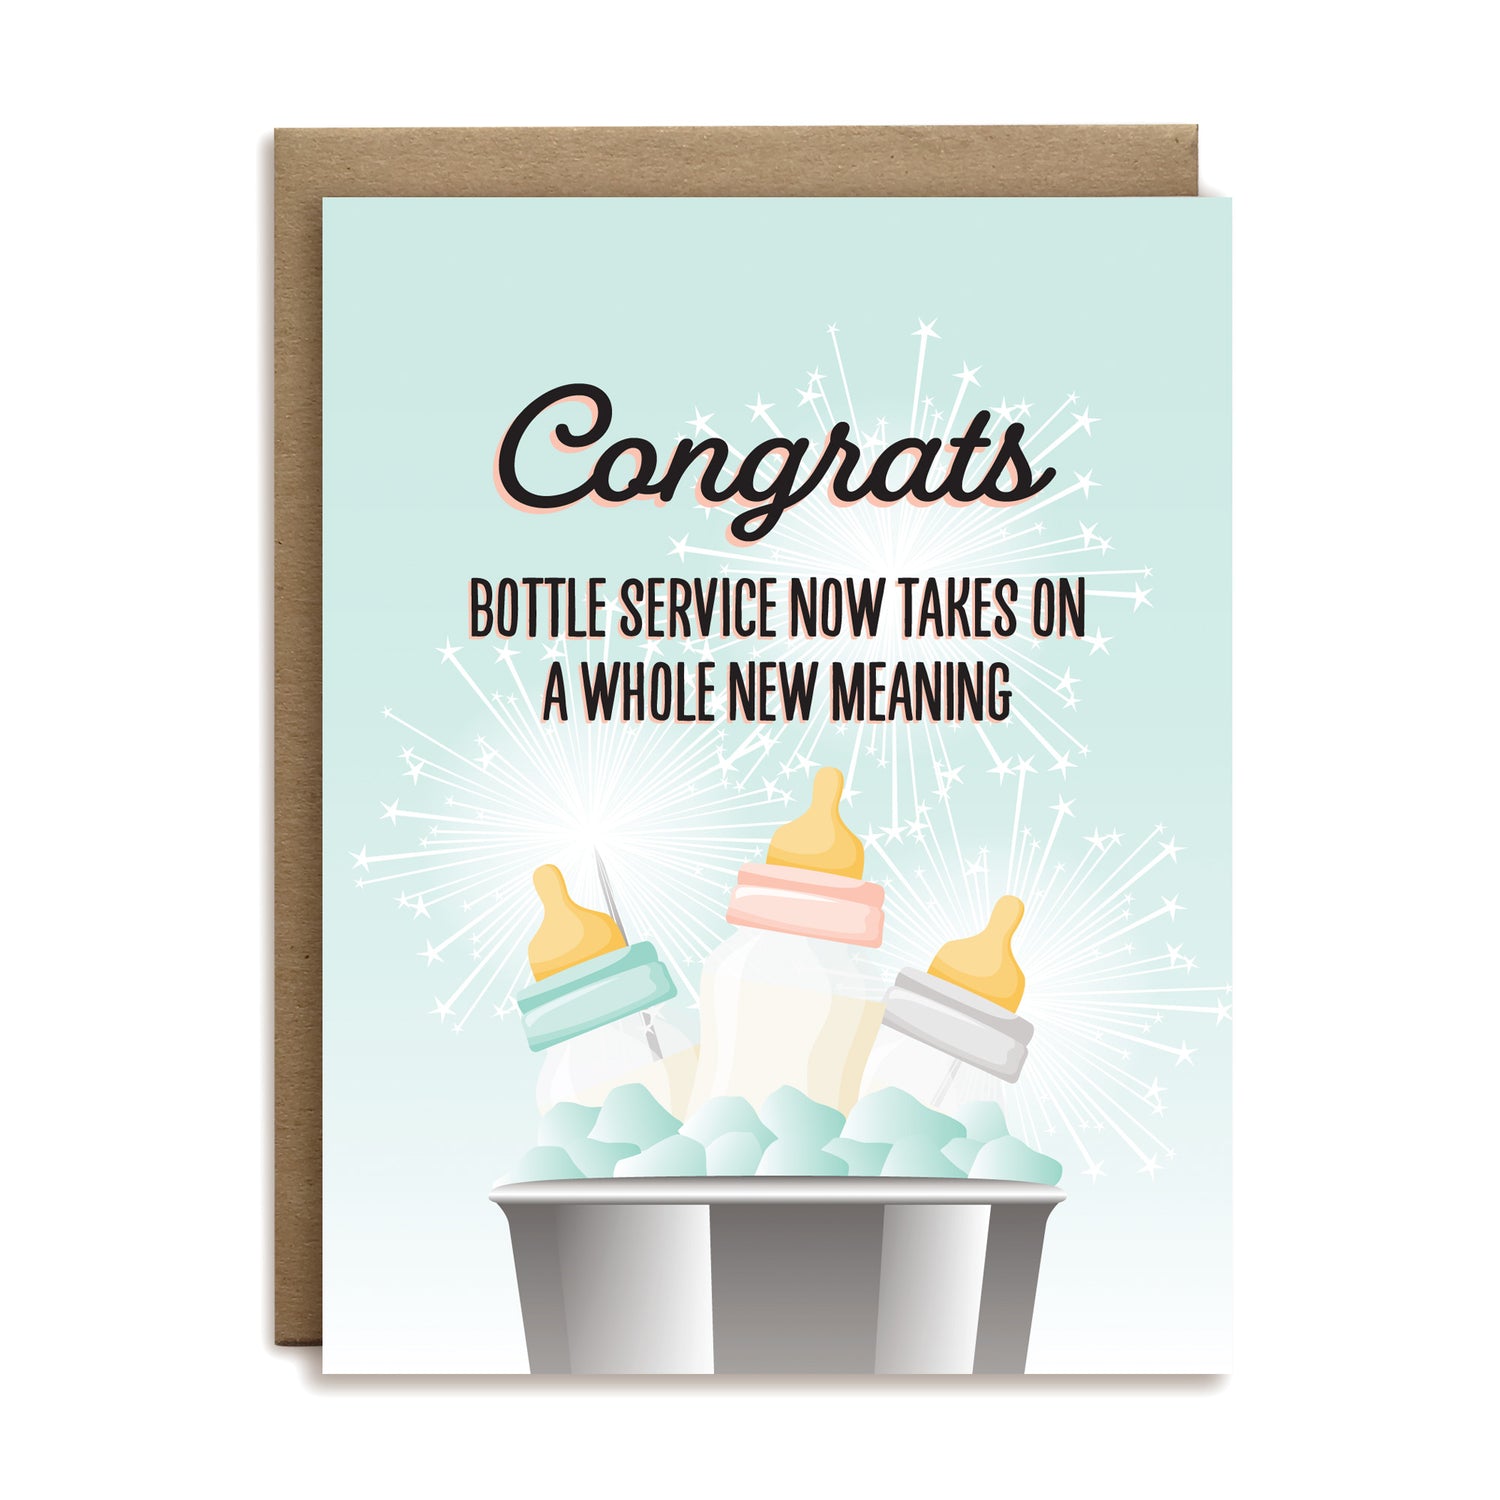 Congrats! Bottle service now takes on a whole new meaning baby greeting card by I&